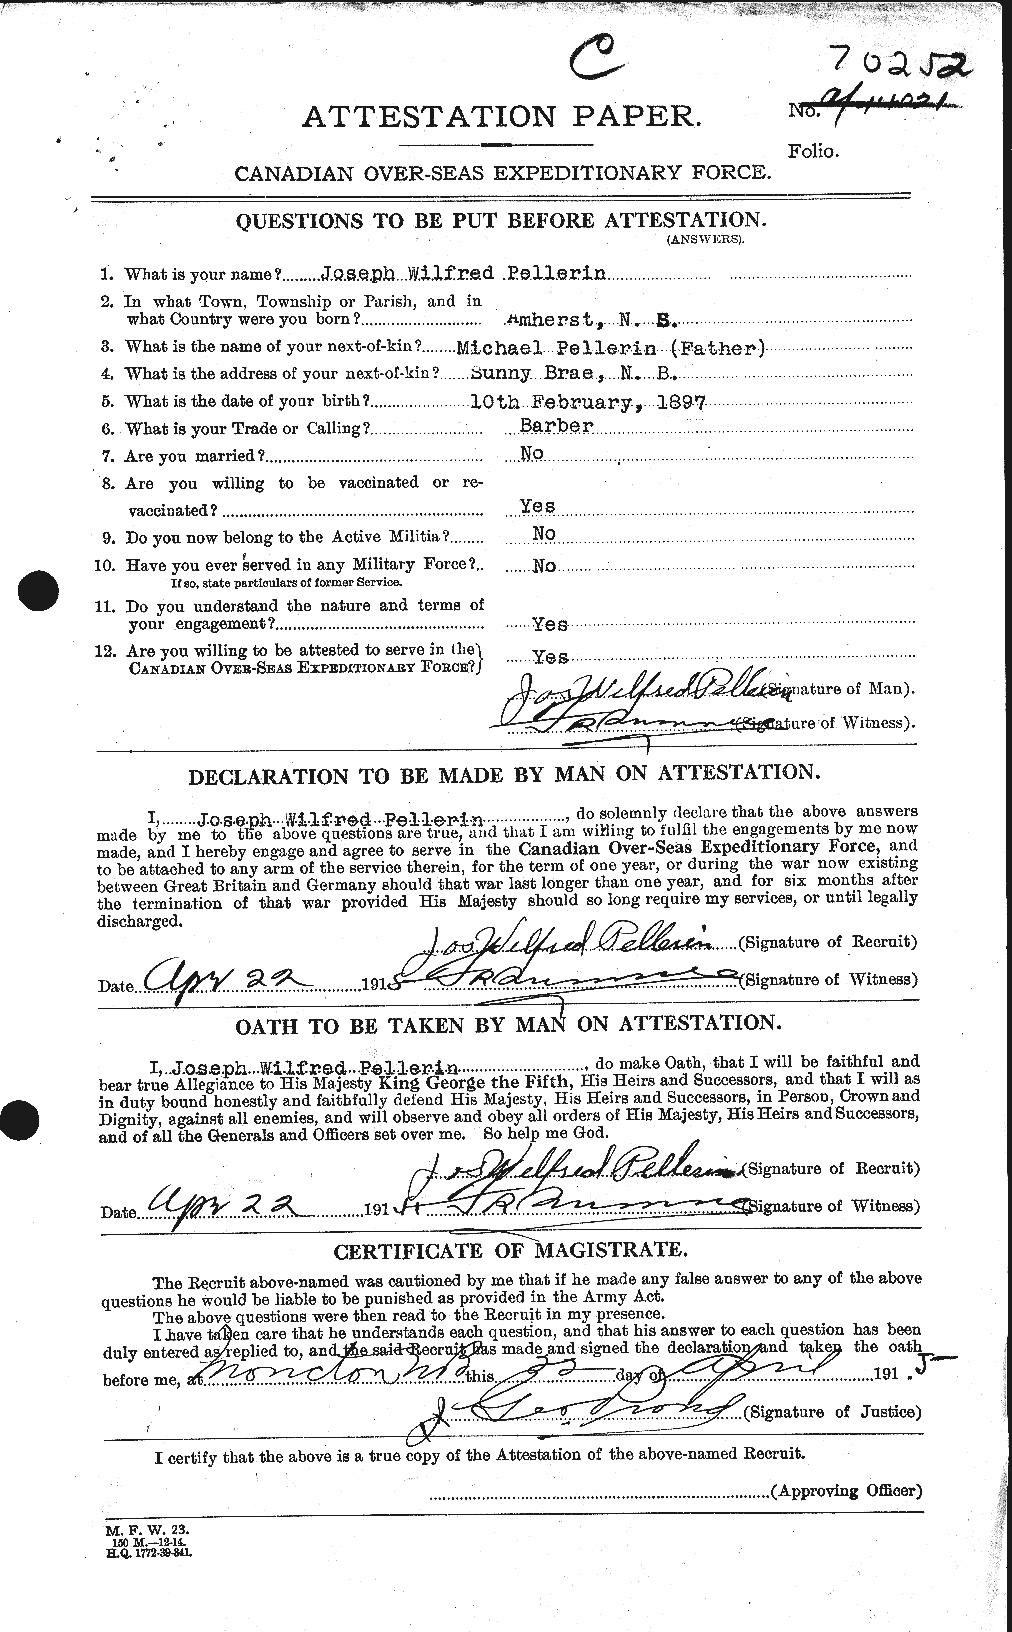 Personnel Records of the First World War - CEF 572259a